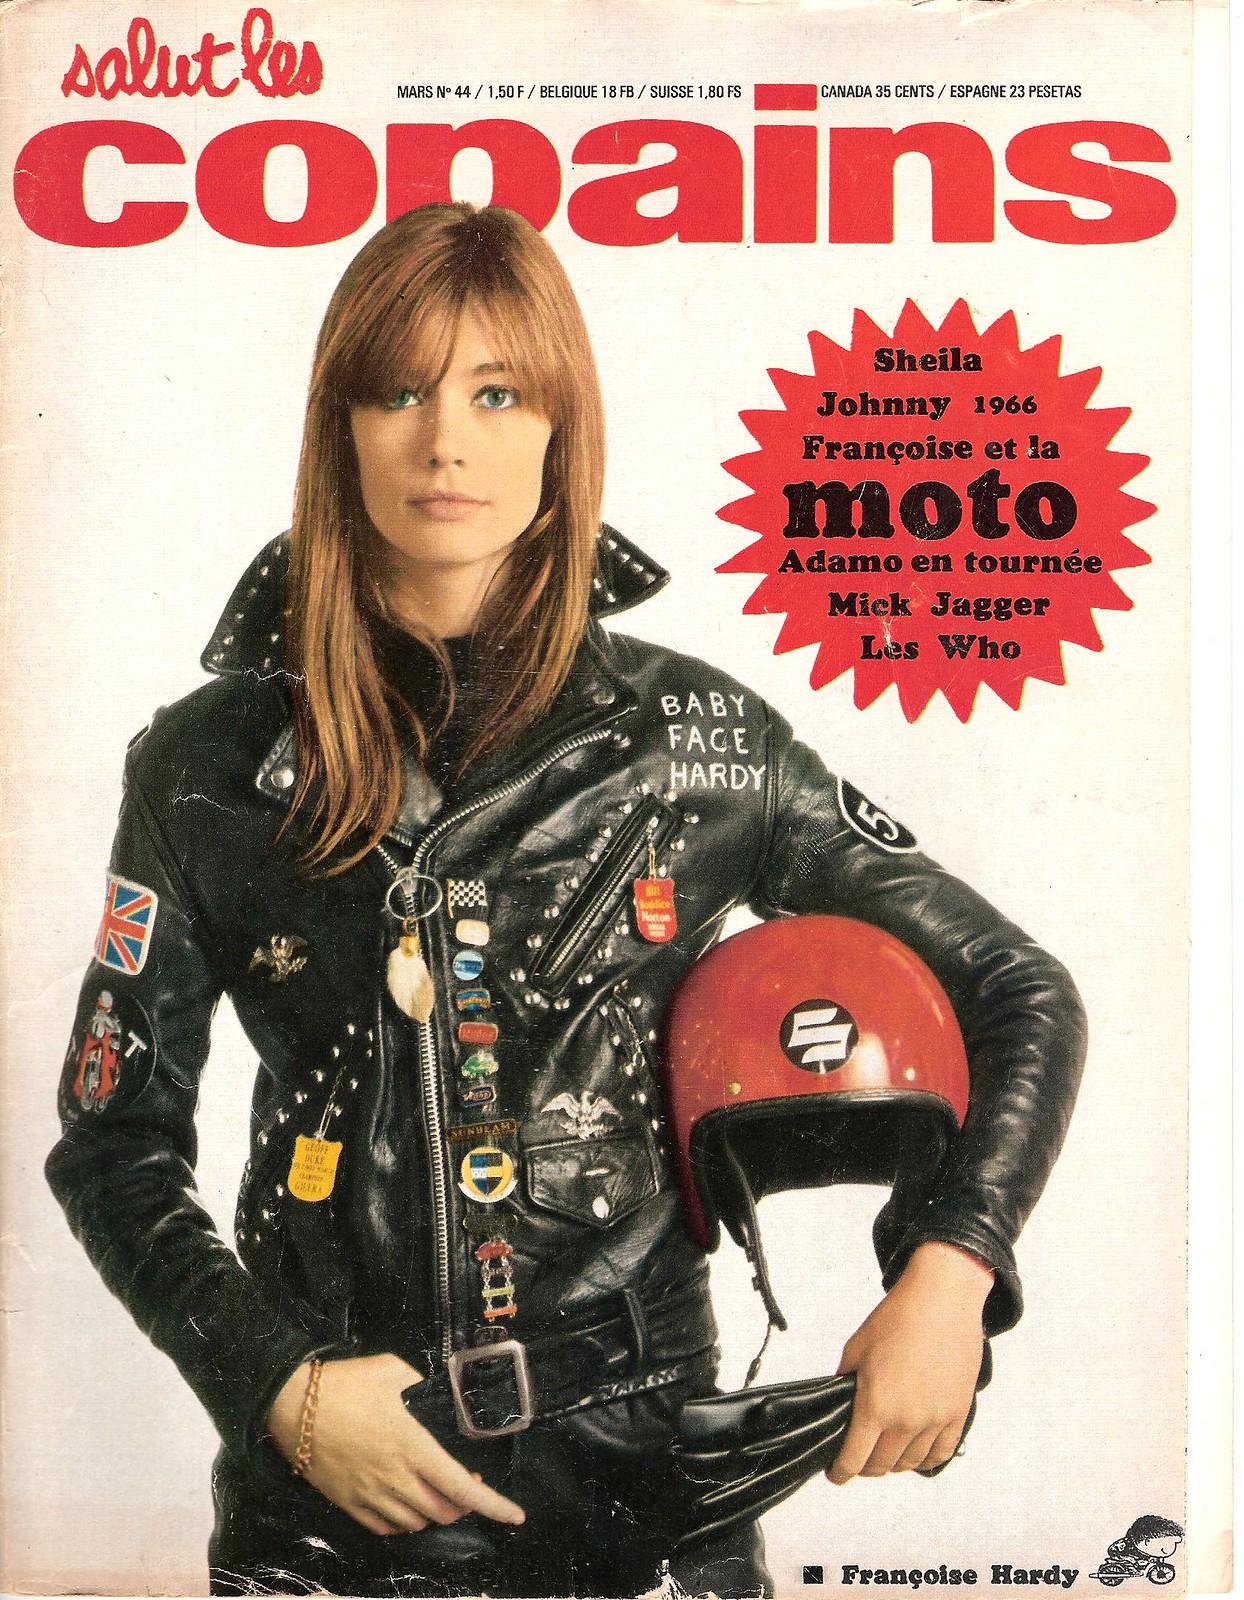 Francoise Hardy on the cover of a motorcycle magazine, 1966.jpeg